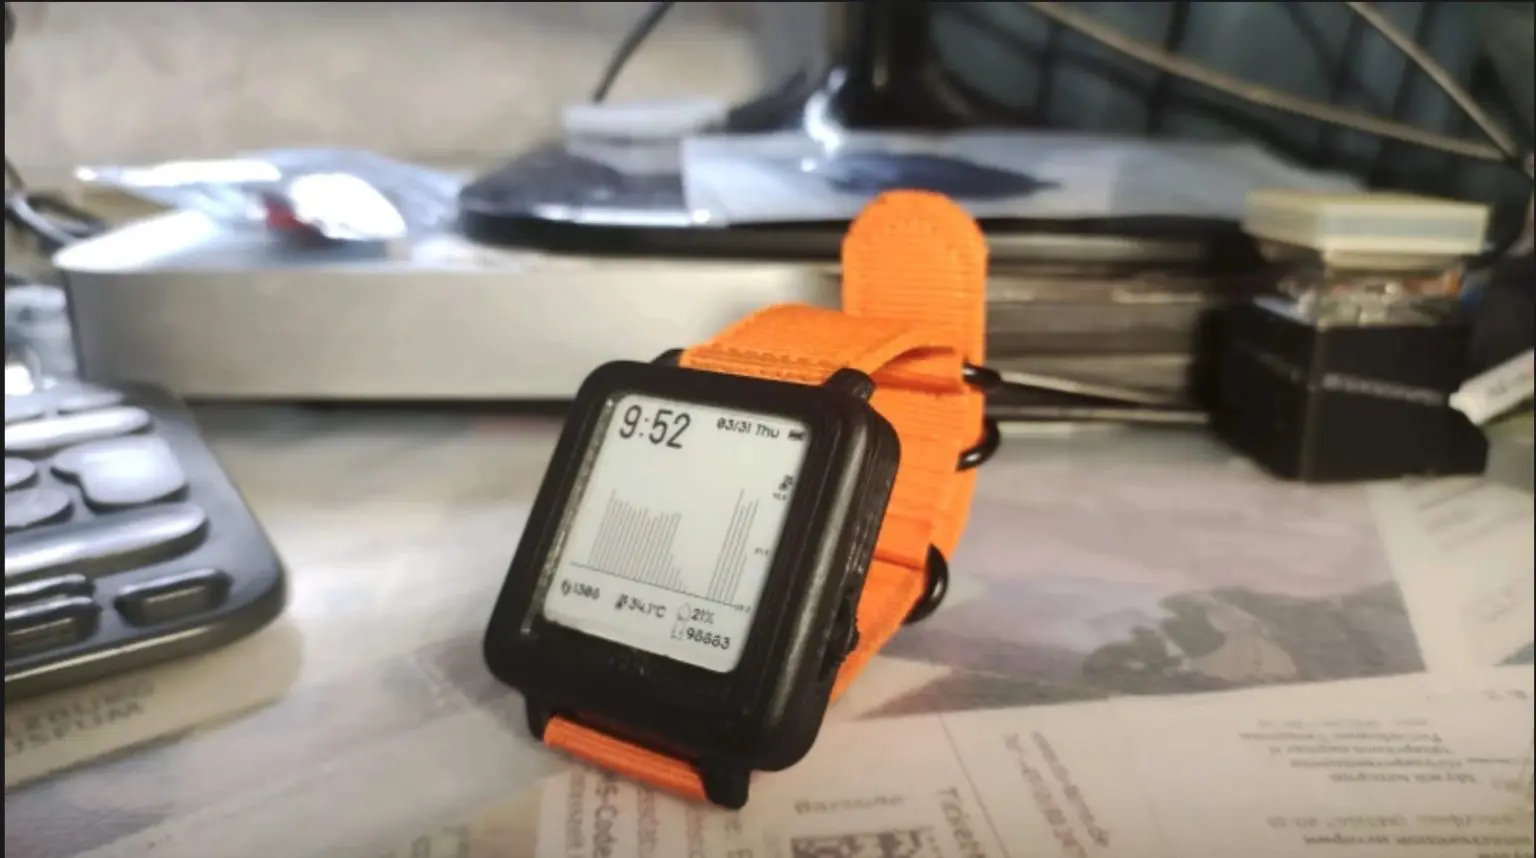 TshWatch smart wearable with E Ink display will keep tabs on your body